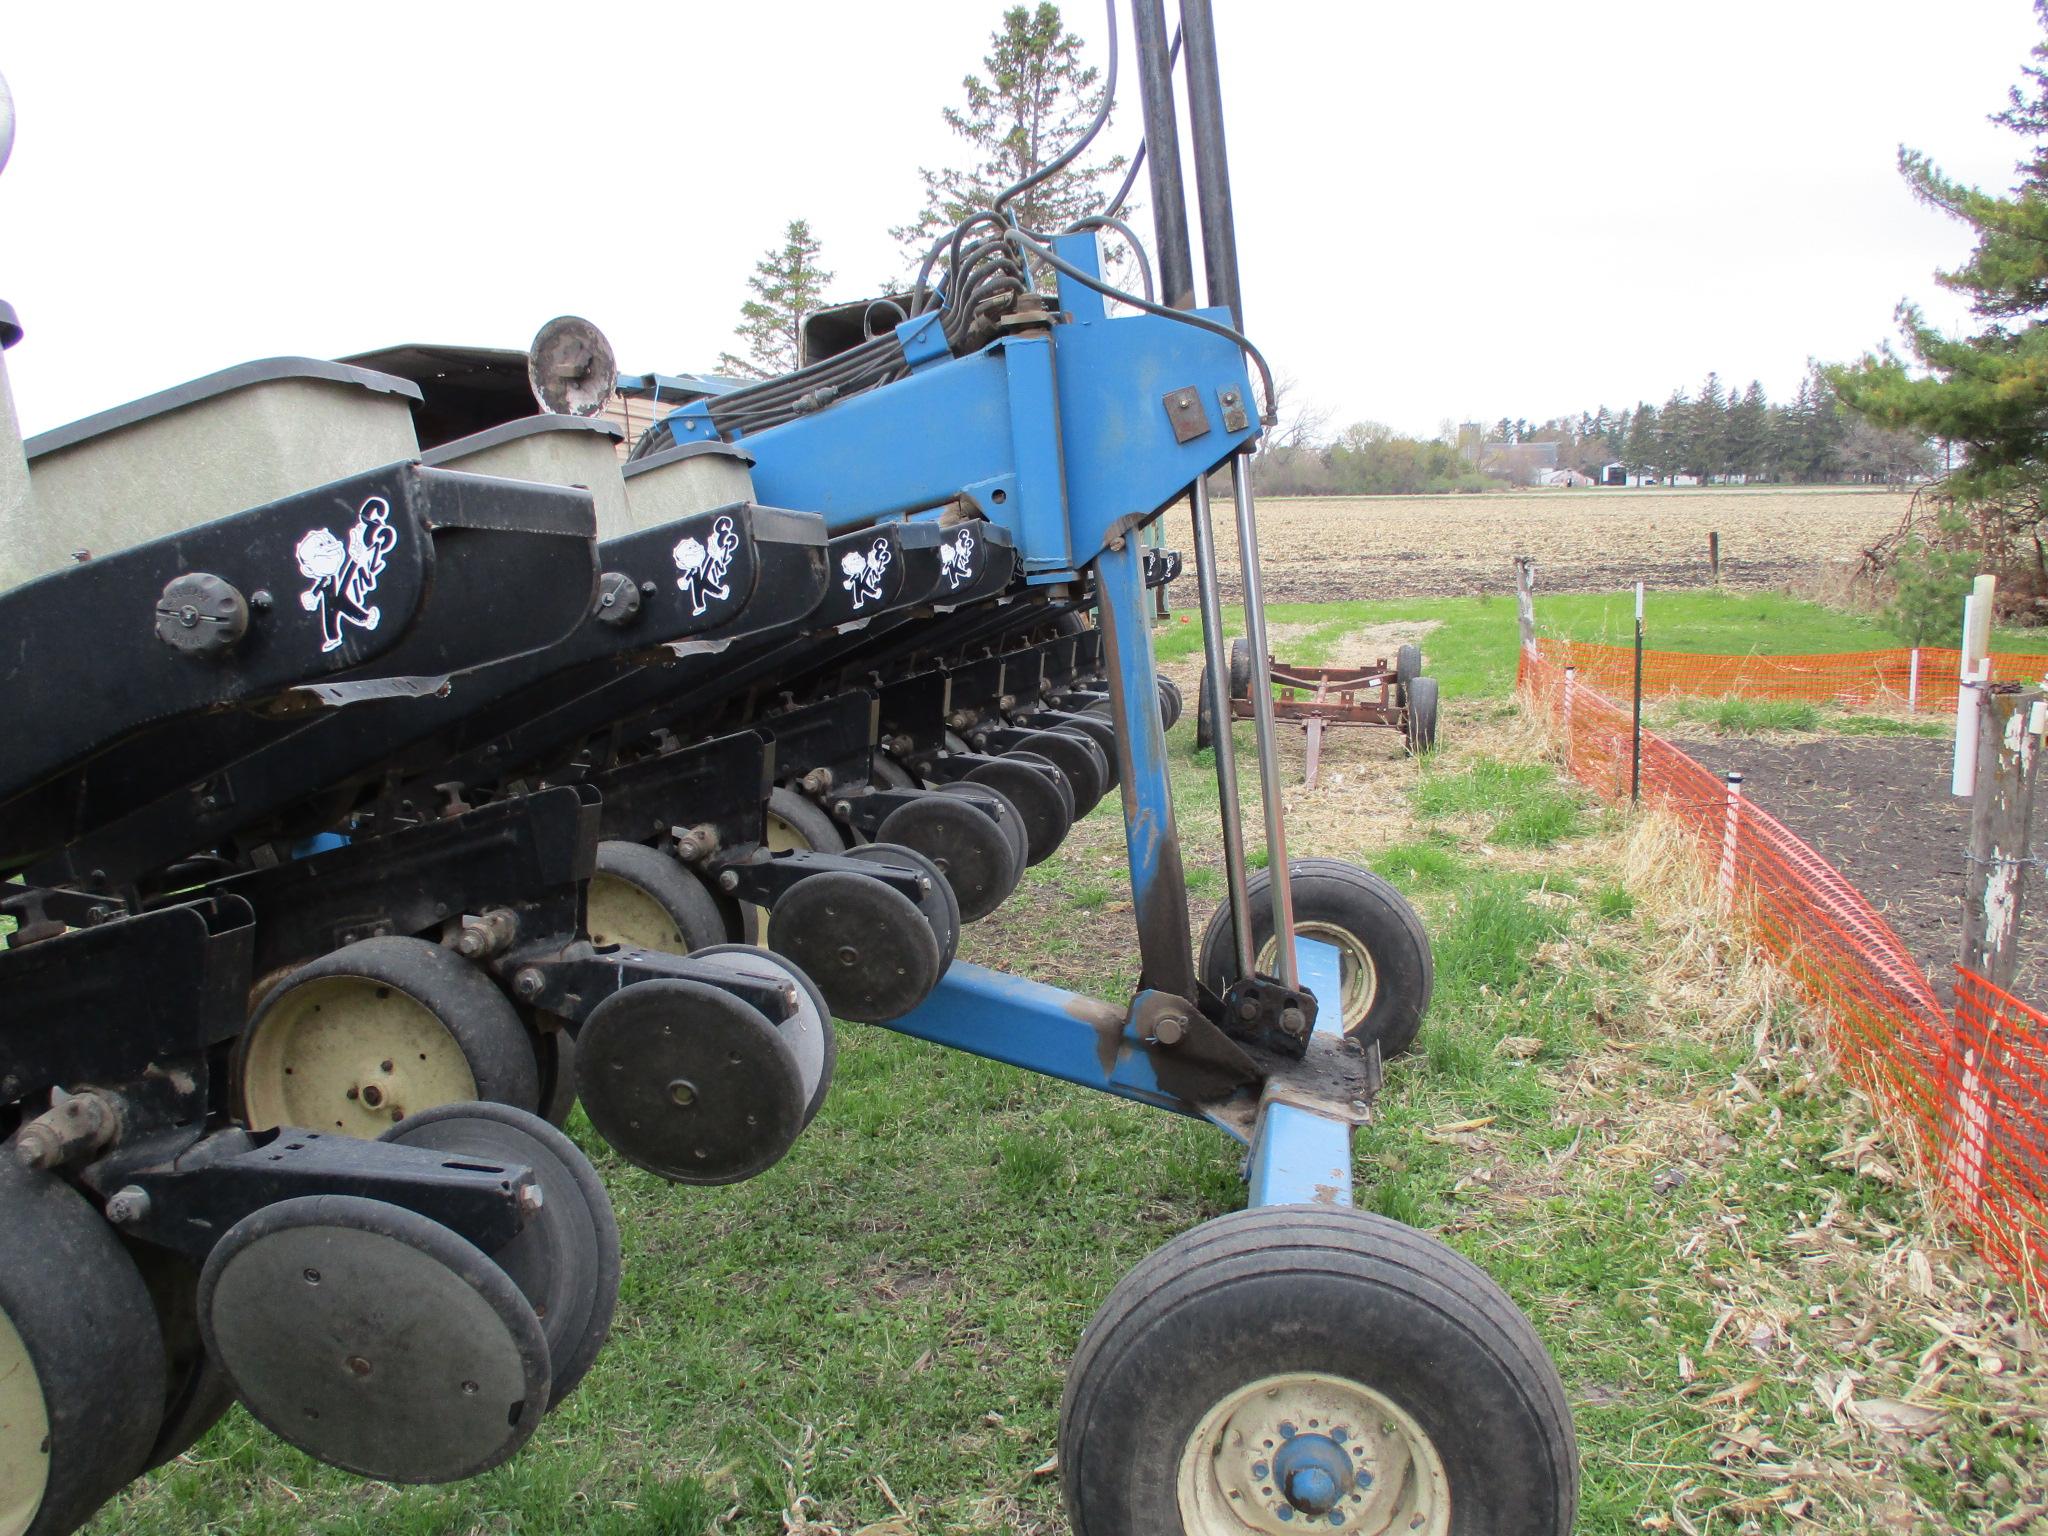 Kinze RF 12R 30" planter, Yetter trash whips, Insect boxes